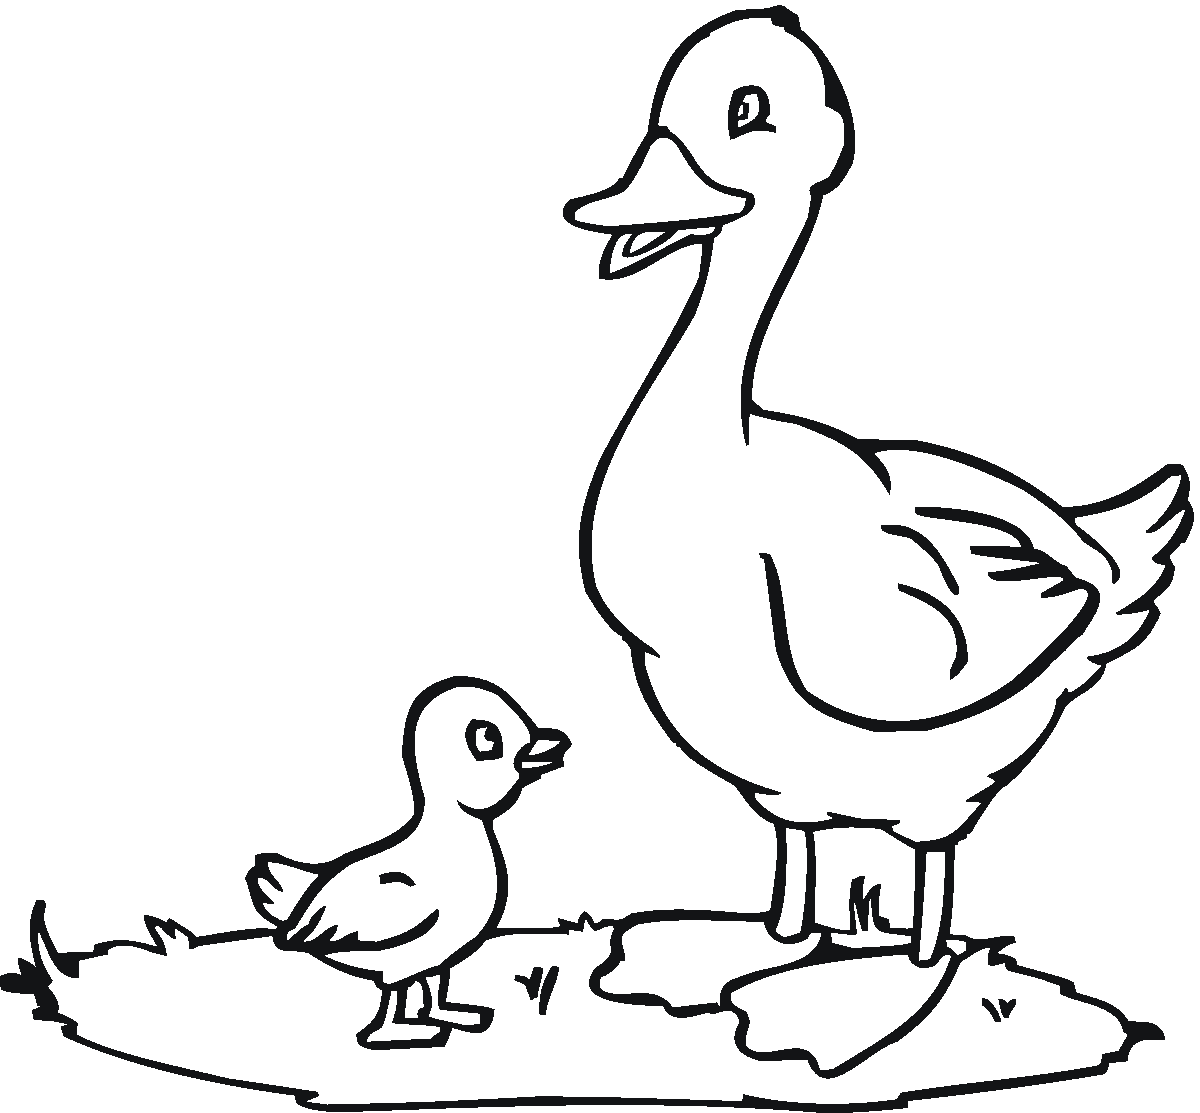 272 Cartoon Duckling Coloring Page with disney character